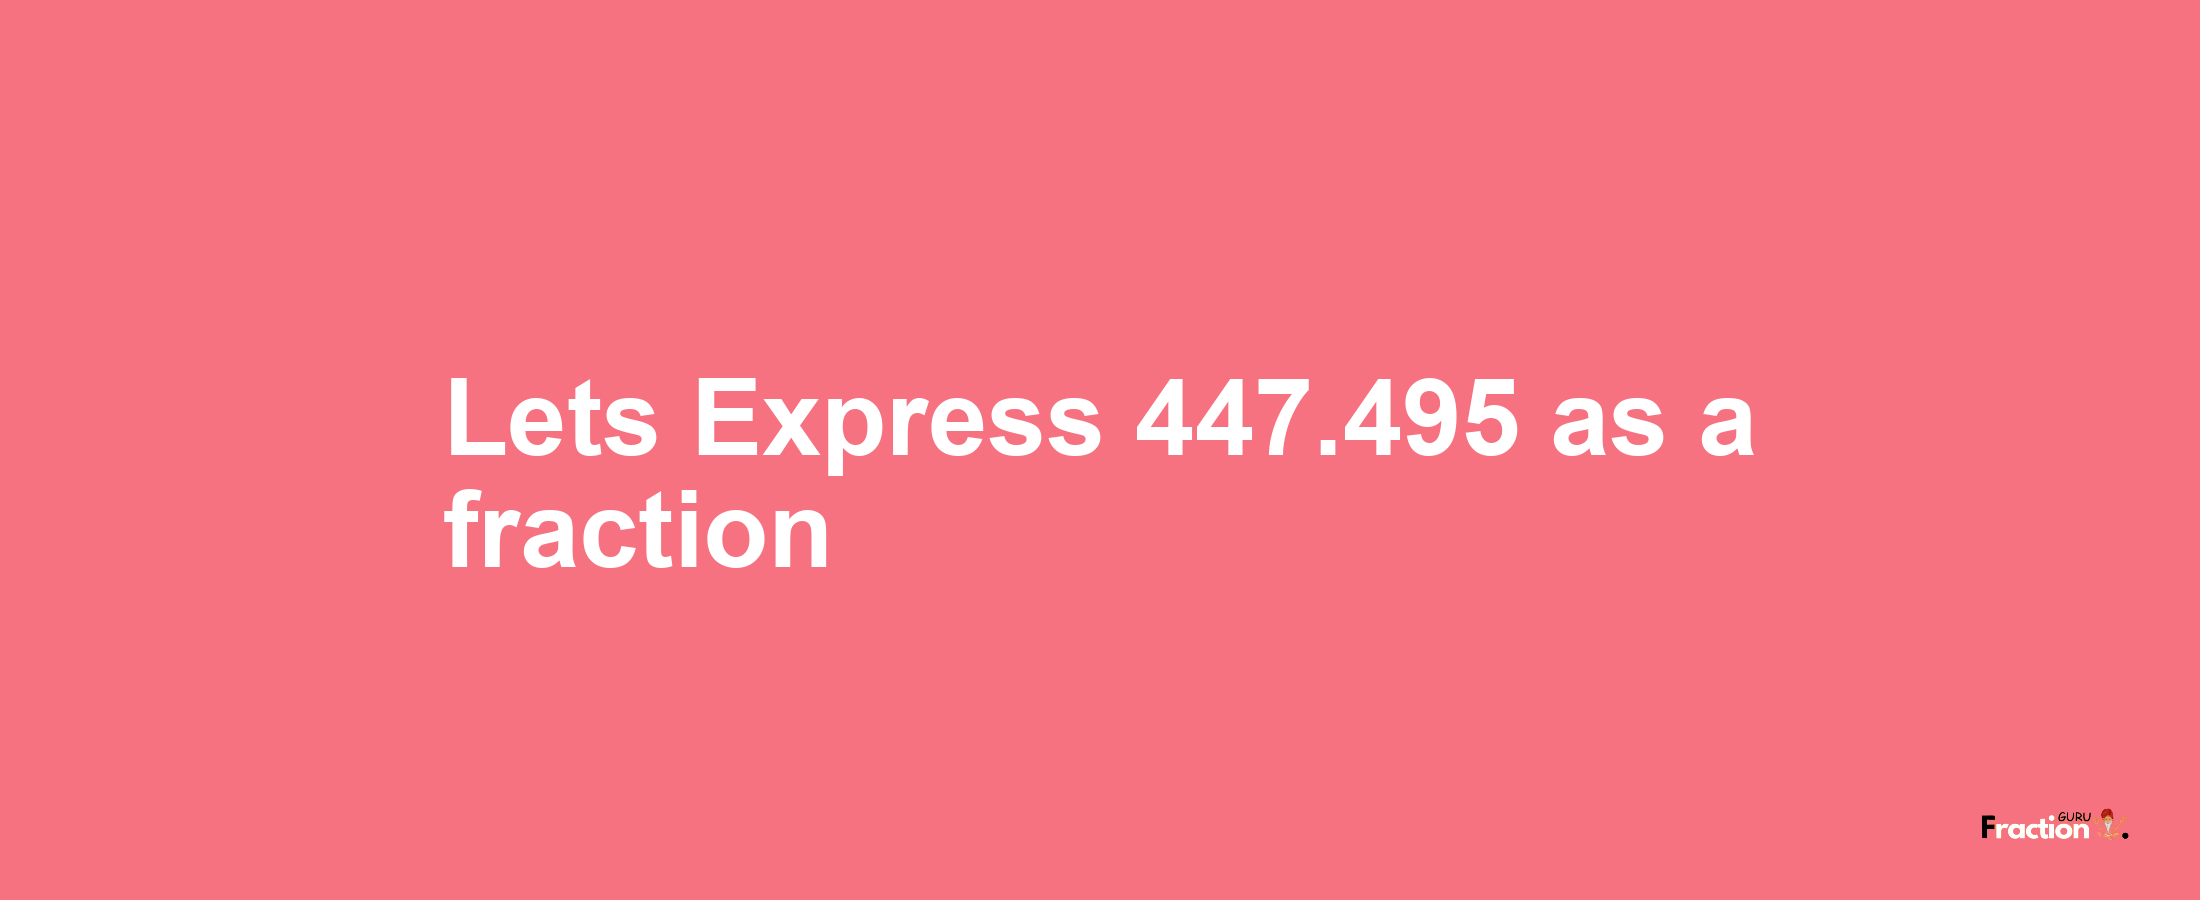 Lets Express 447.495 as afraction